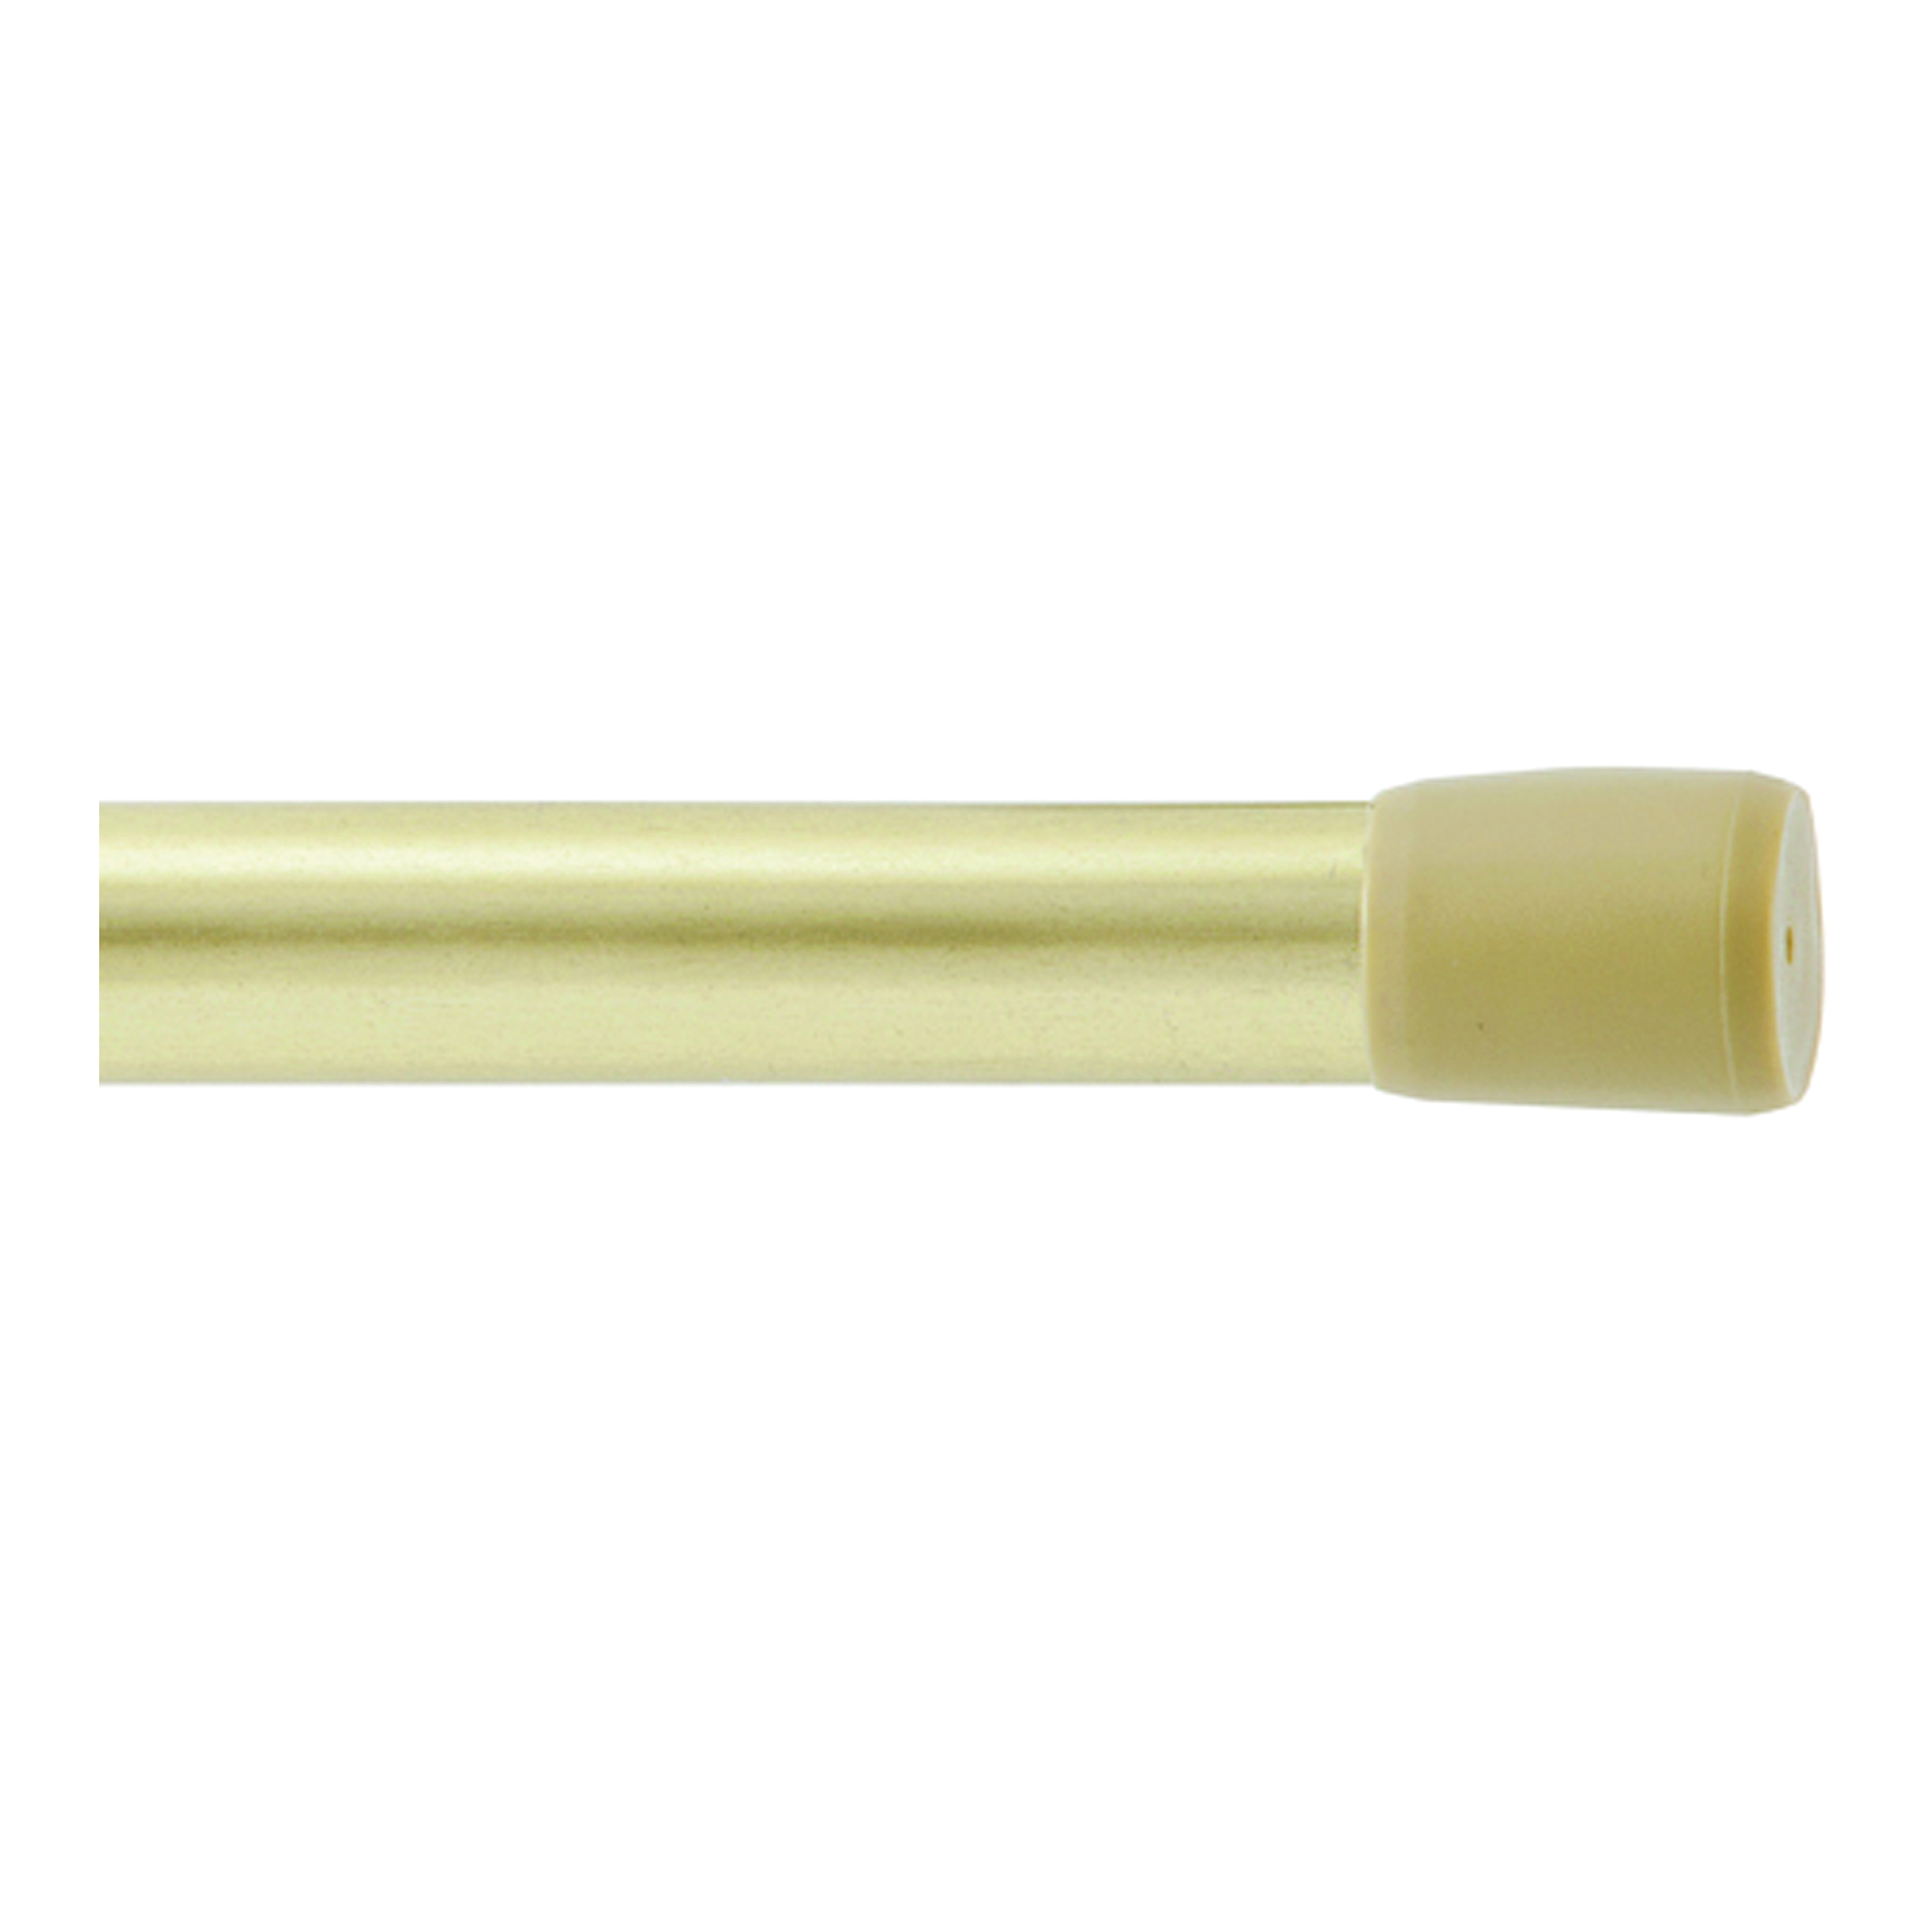 KN611 Spring Tension Rod, 5/8 in Dia, 28 to 48 in L, Brass